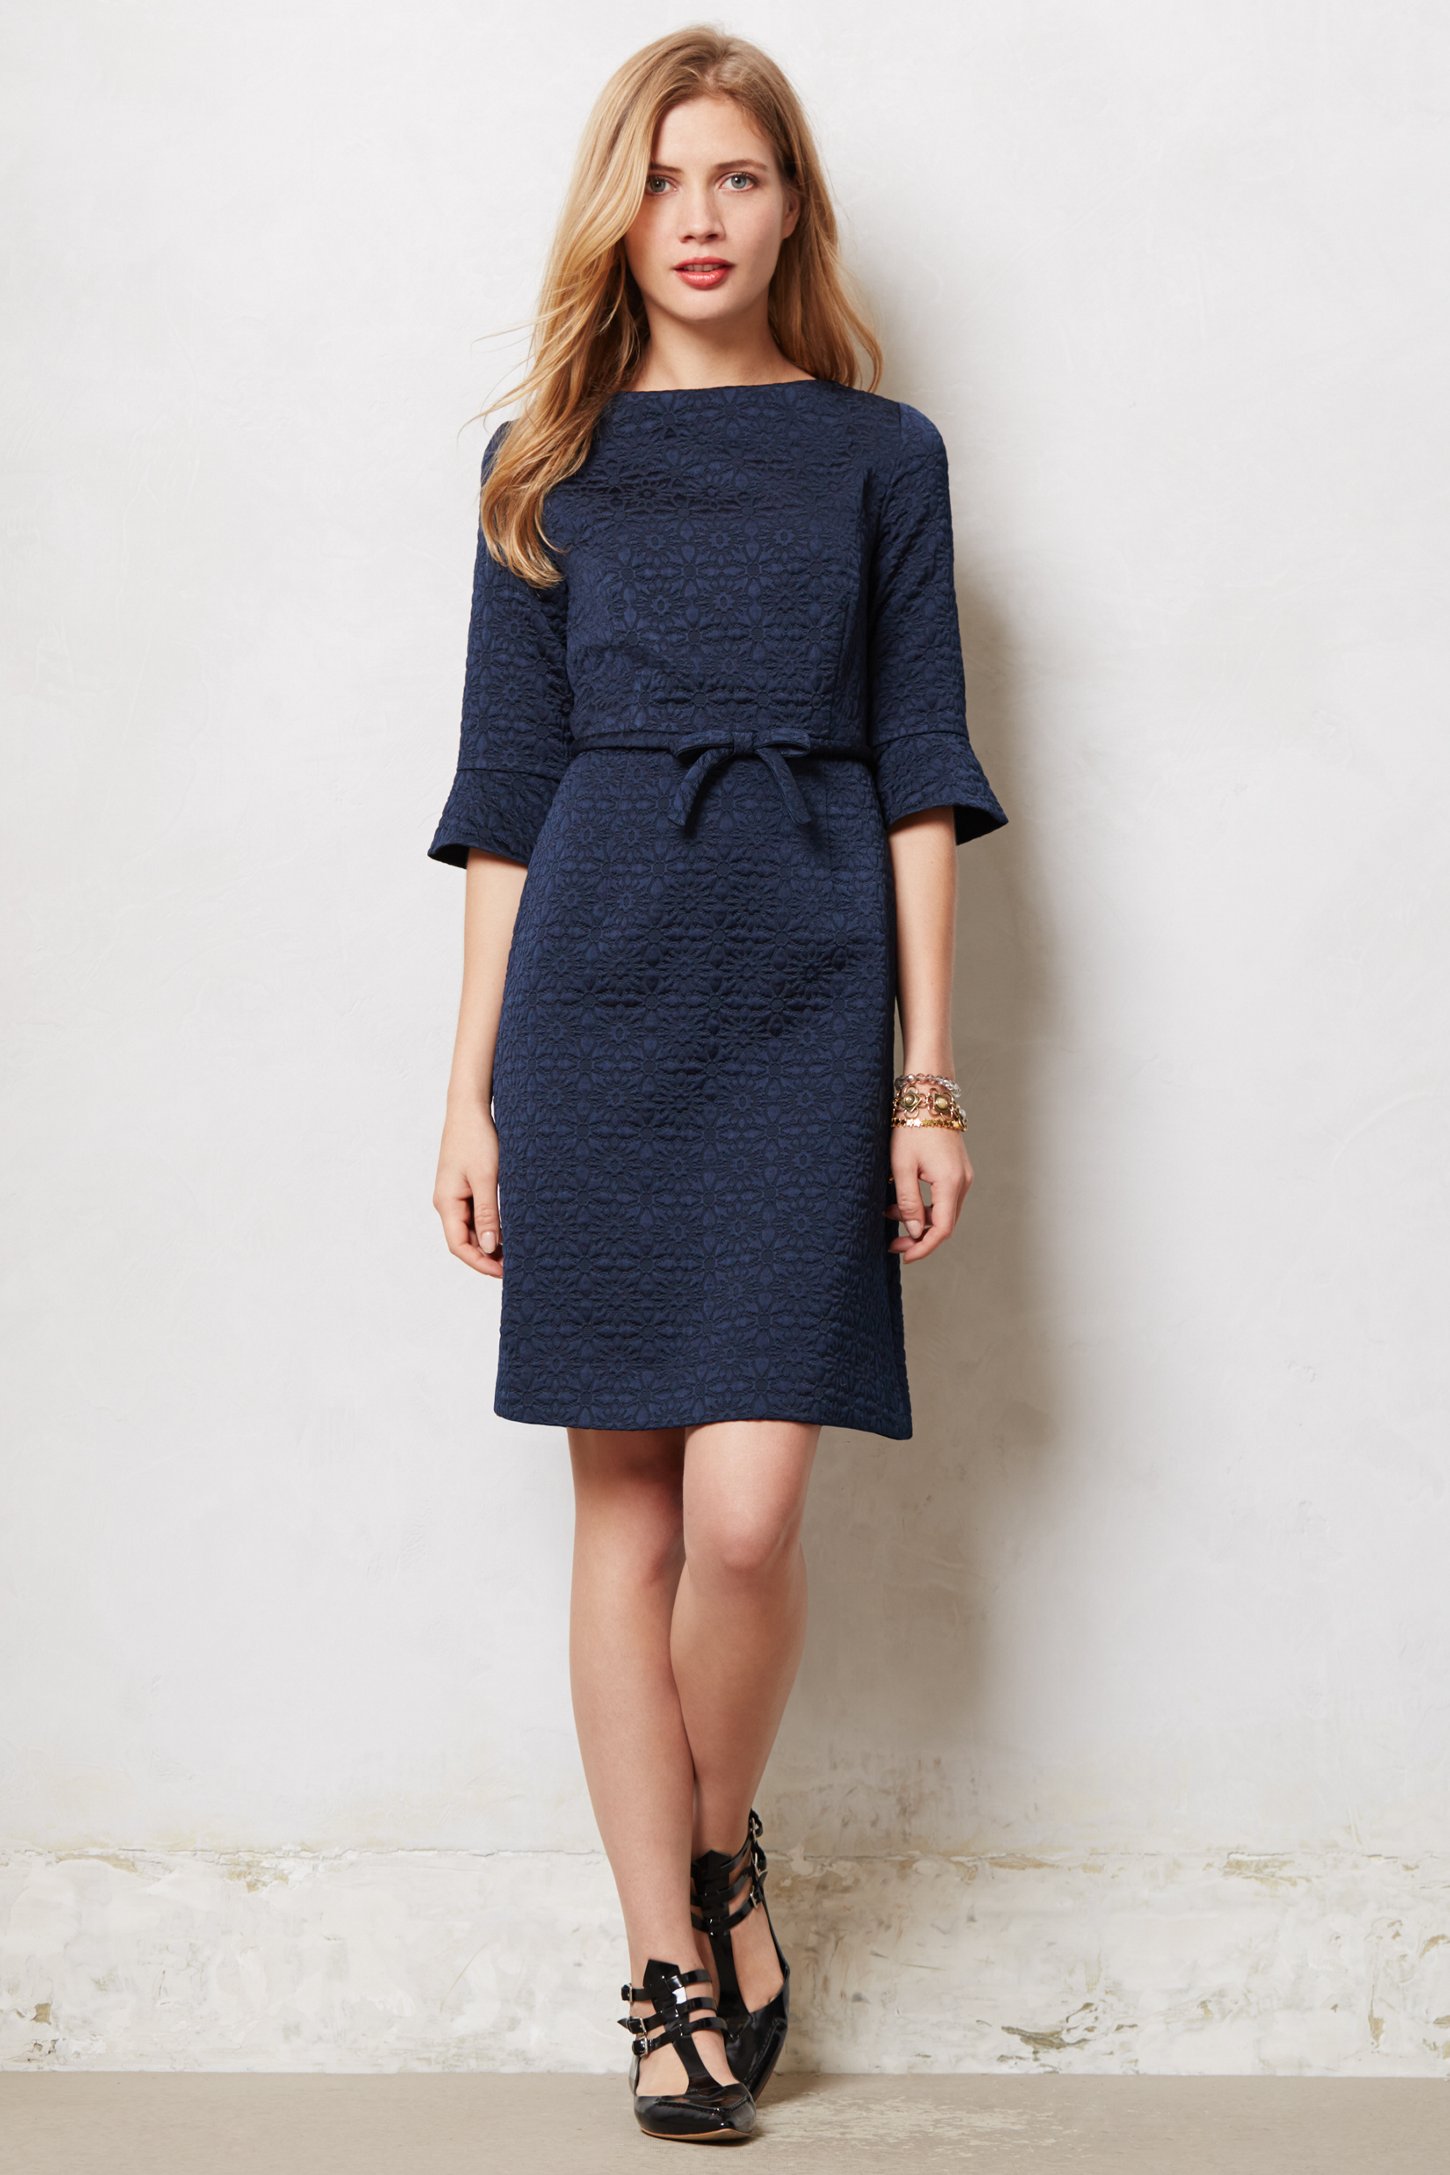 Orla Kiely Navy Quilted Aude Dress Product 1 13083123 232992407 